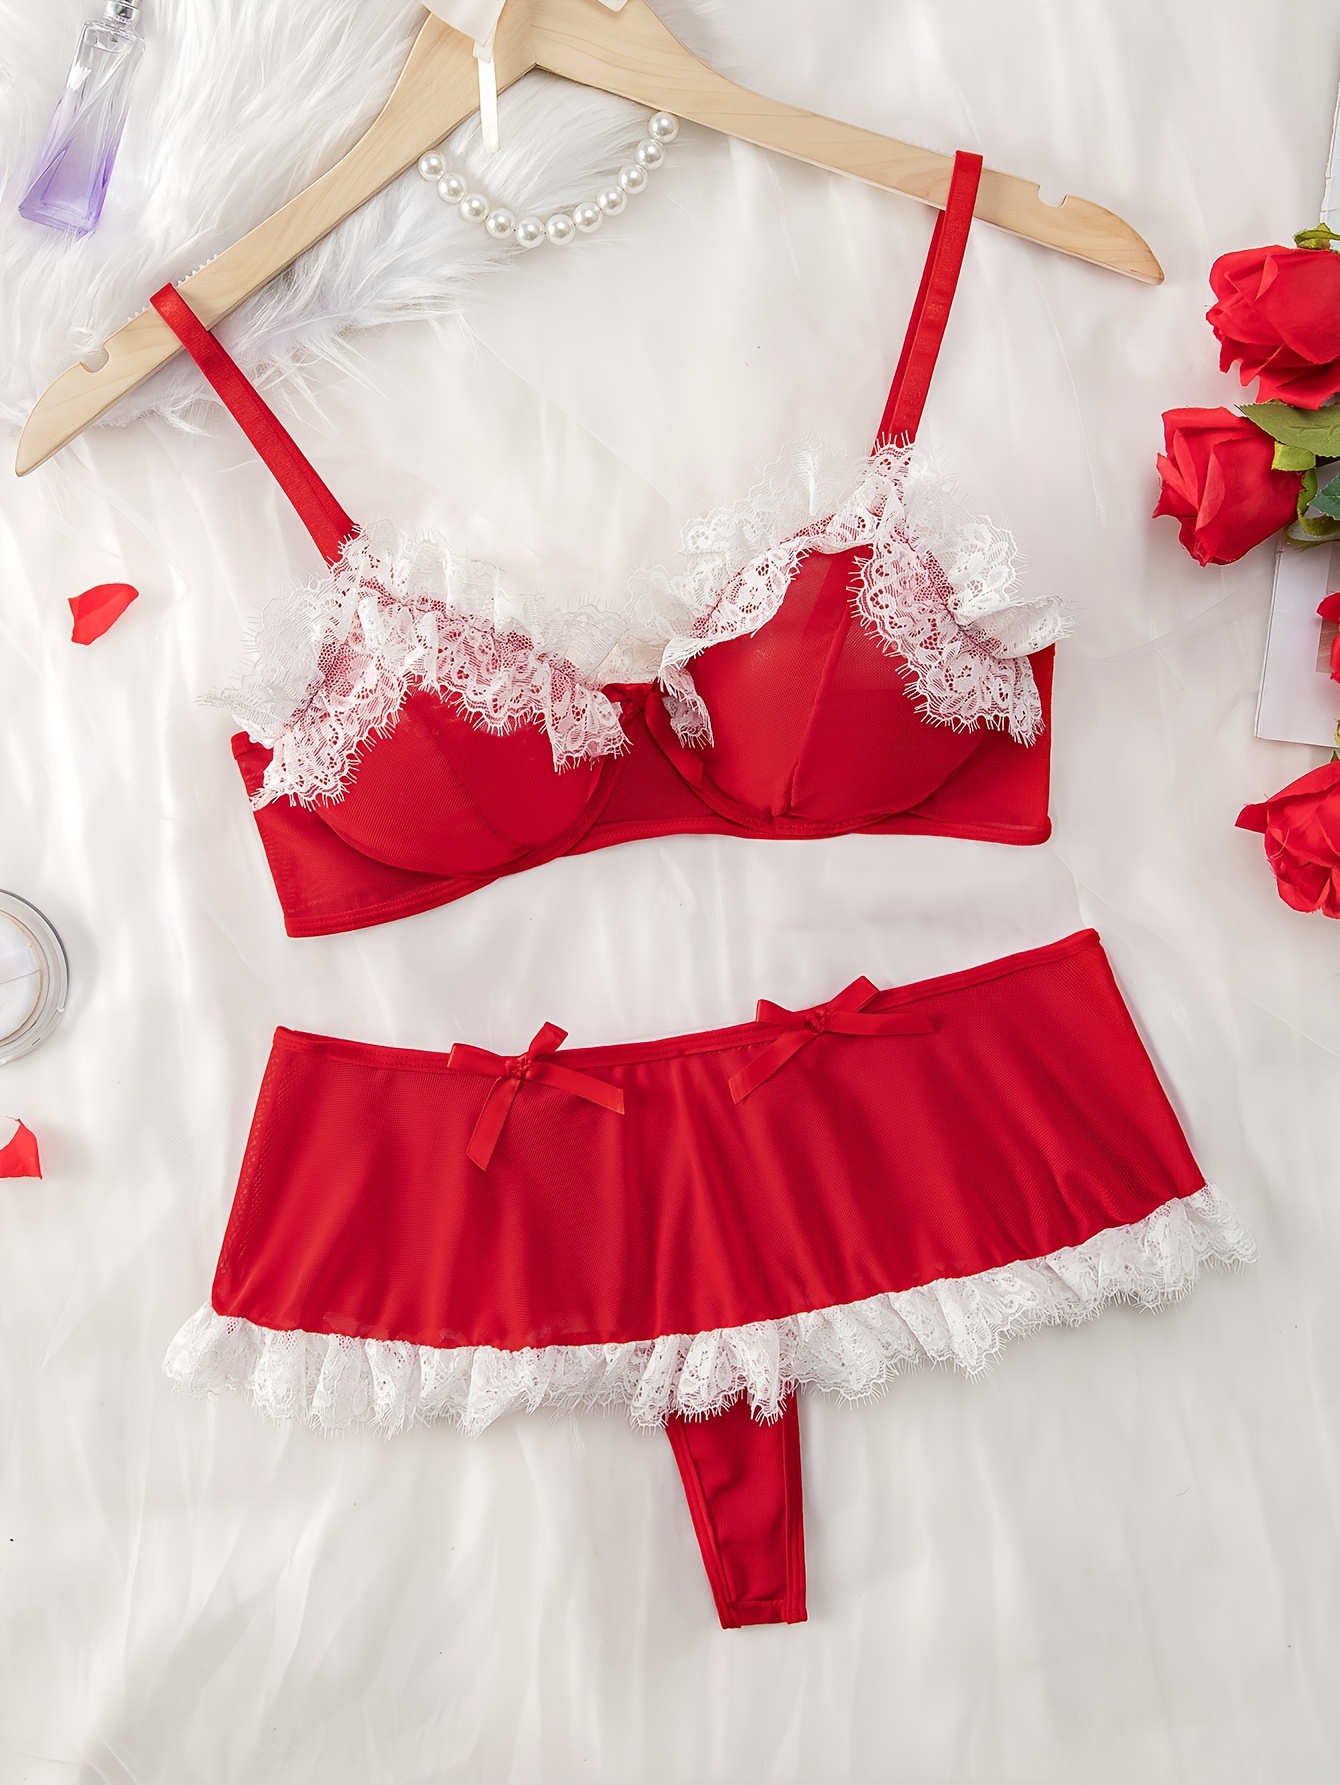 White Ruffles Open Bras Women Lingerie Set Sexy See Through Bra And Thong  Underwear Set With Suspenders Girlfriend Gifts From Tingziwei, $30.37